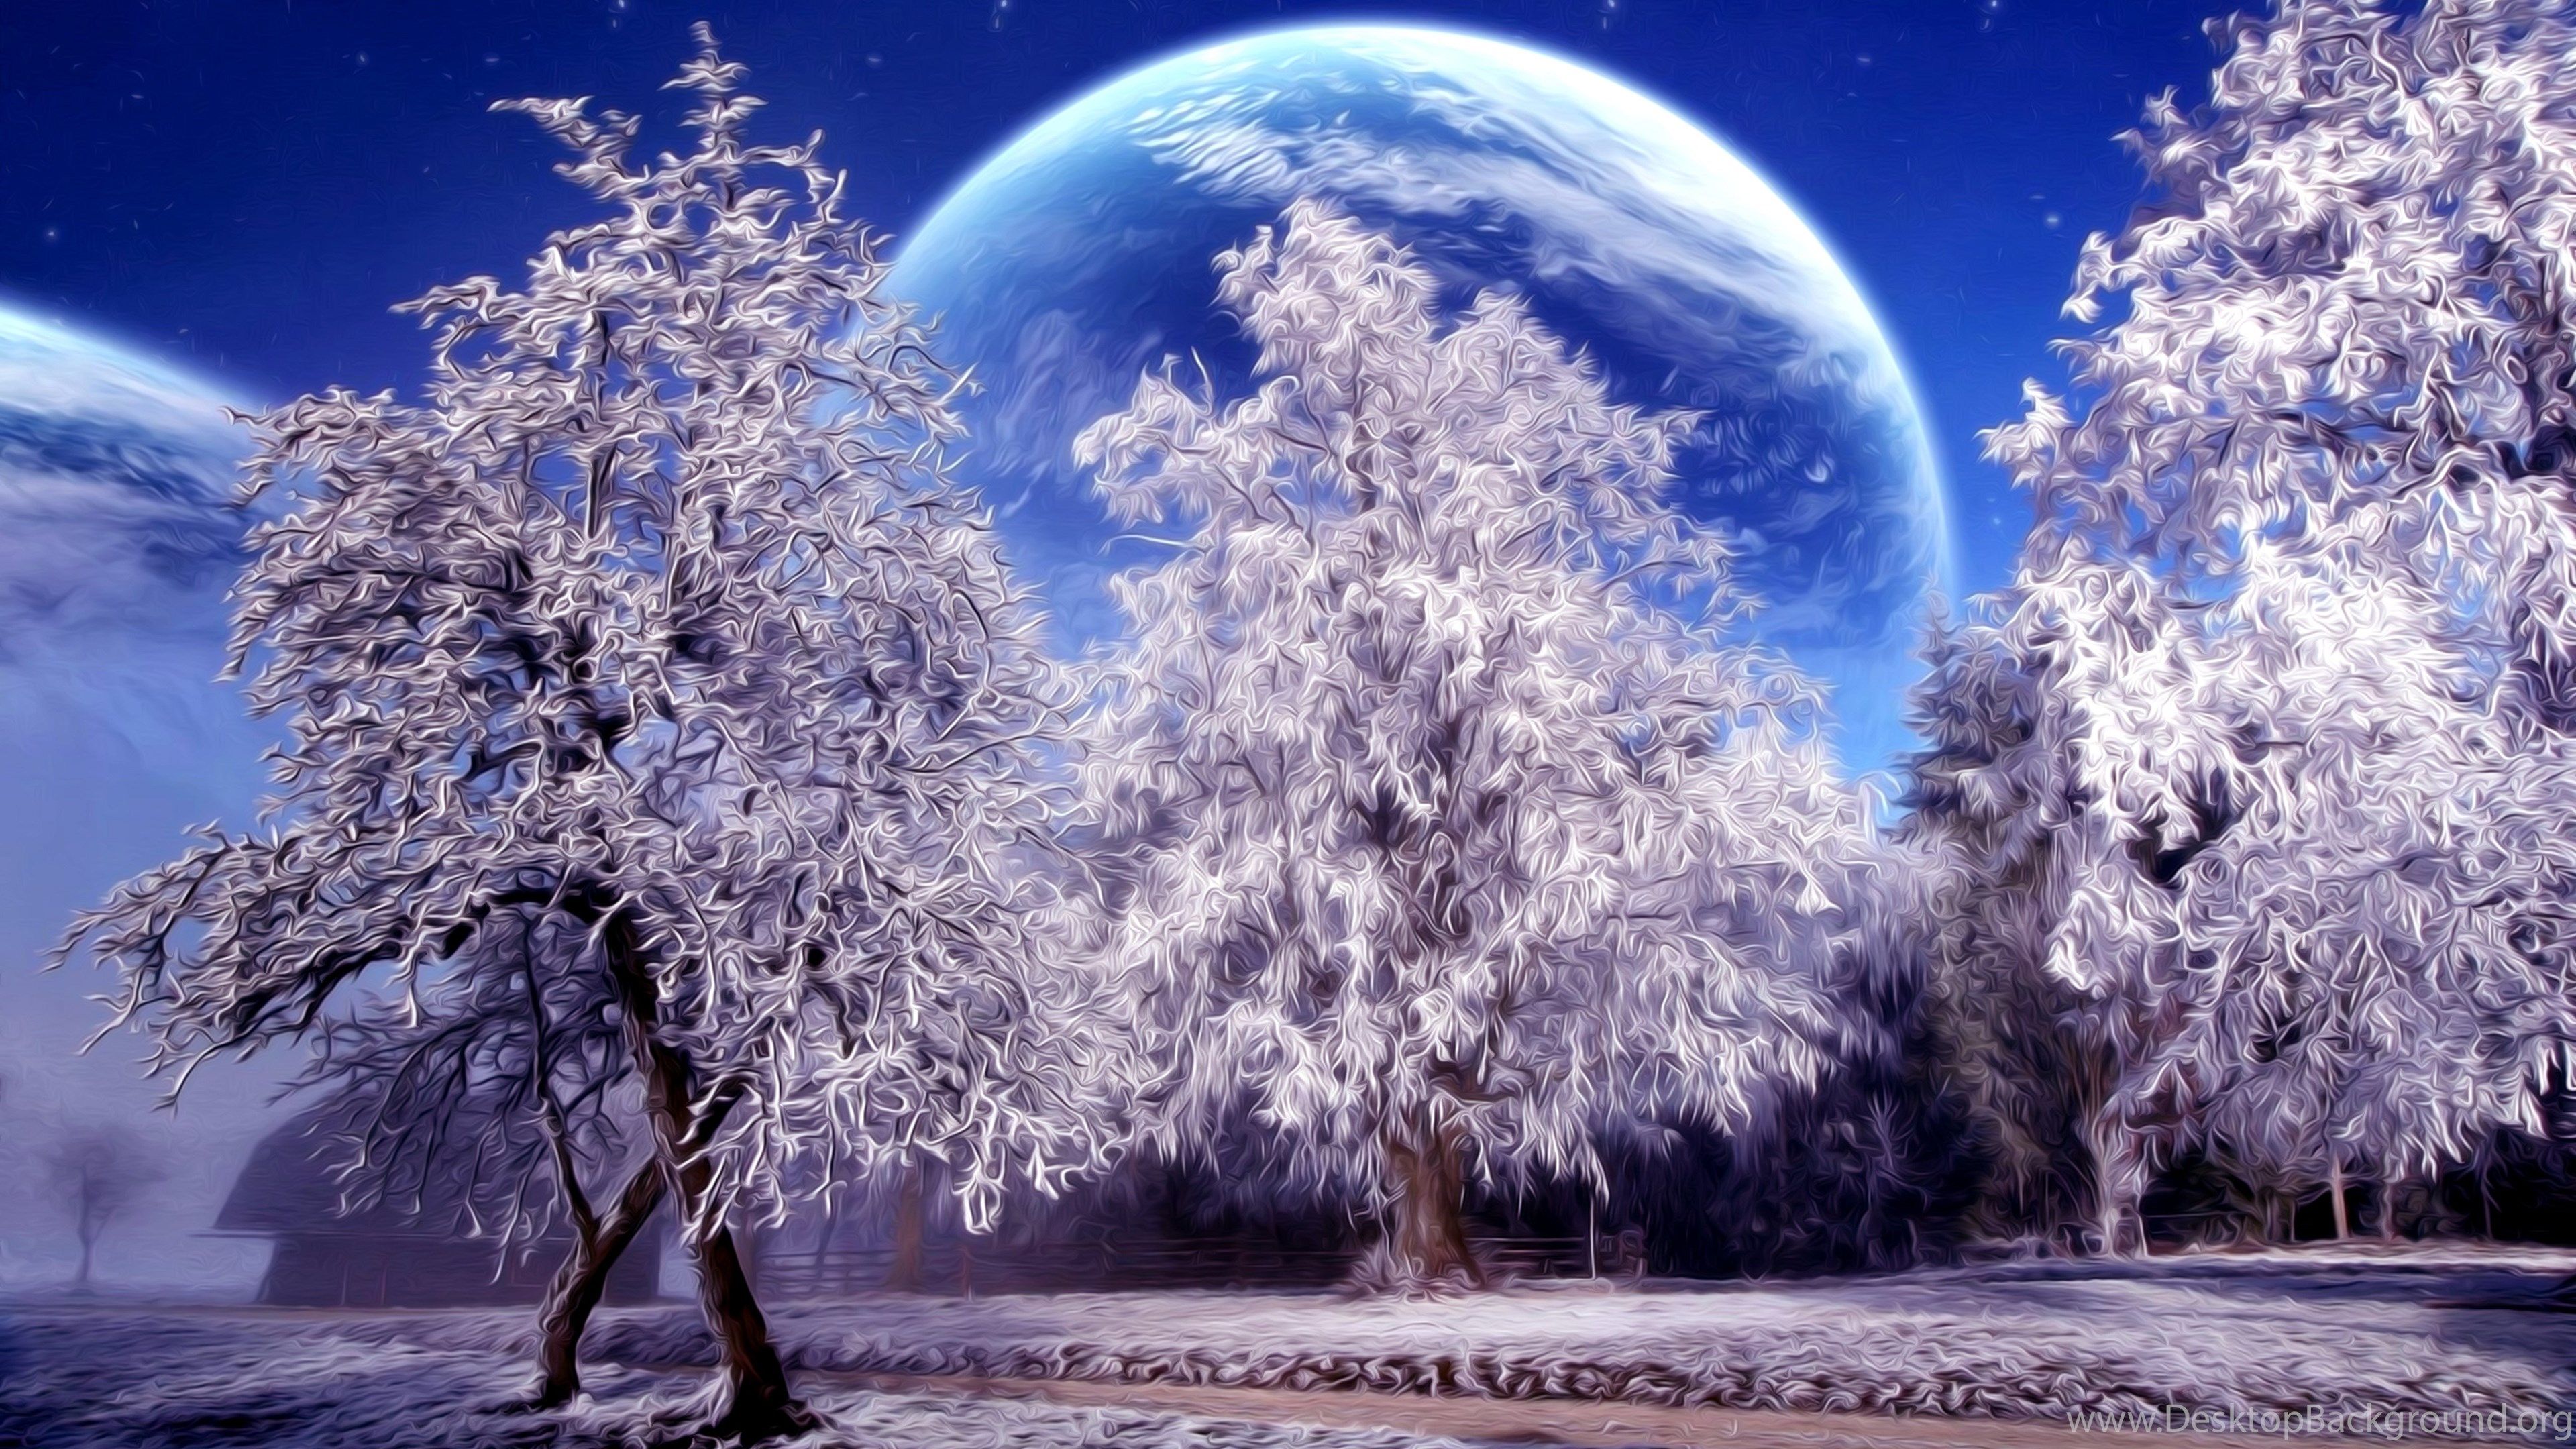 Artistic Winter Wallpaper White Trees And Big Moon Desktop Background